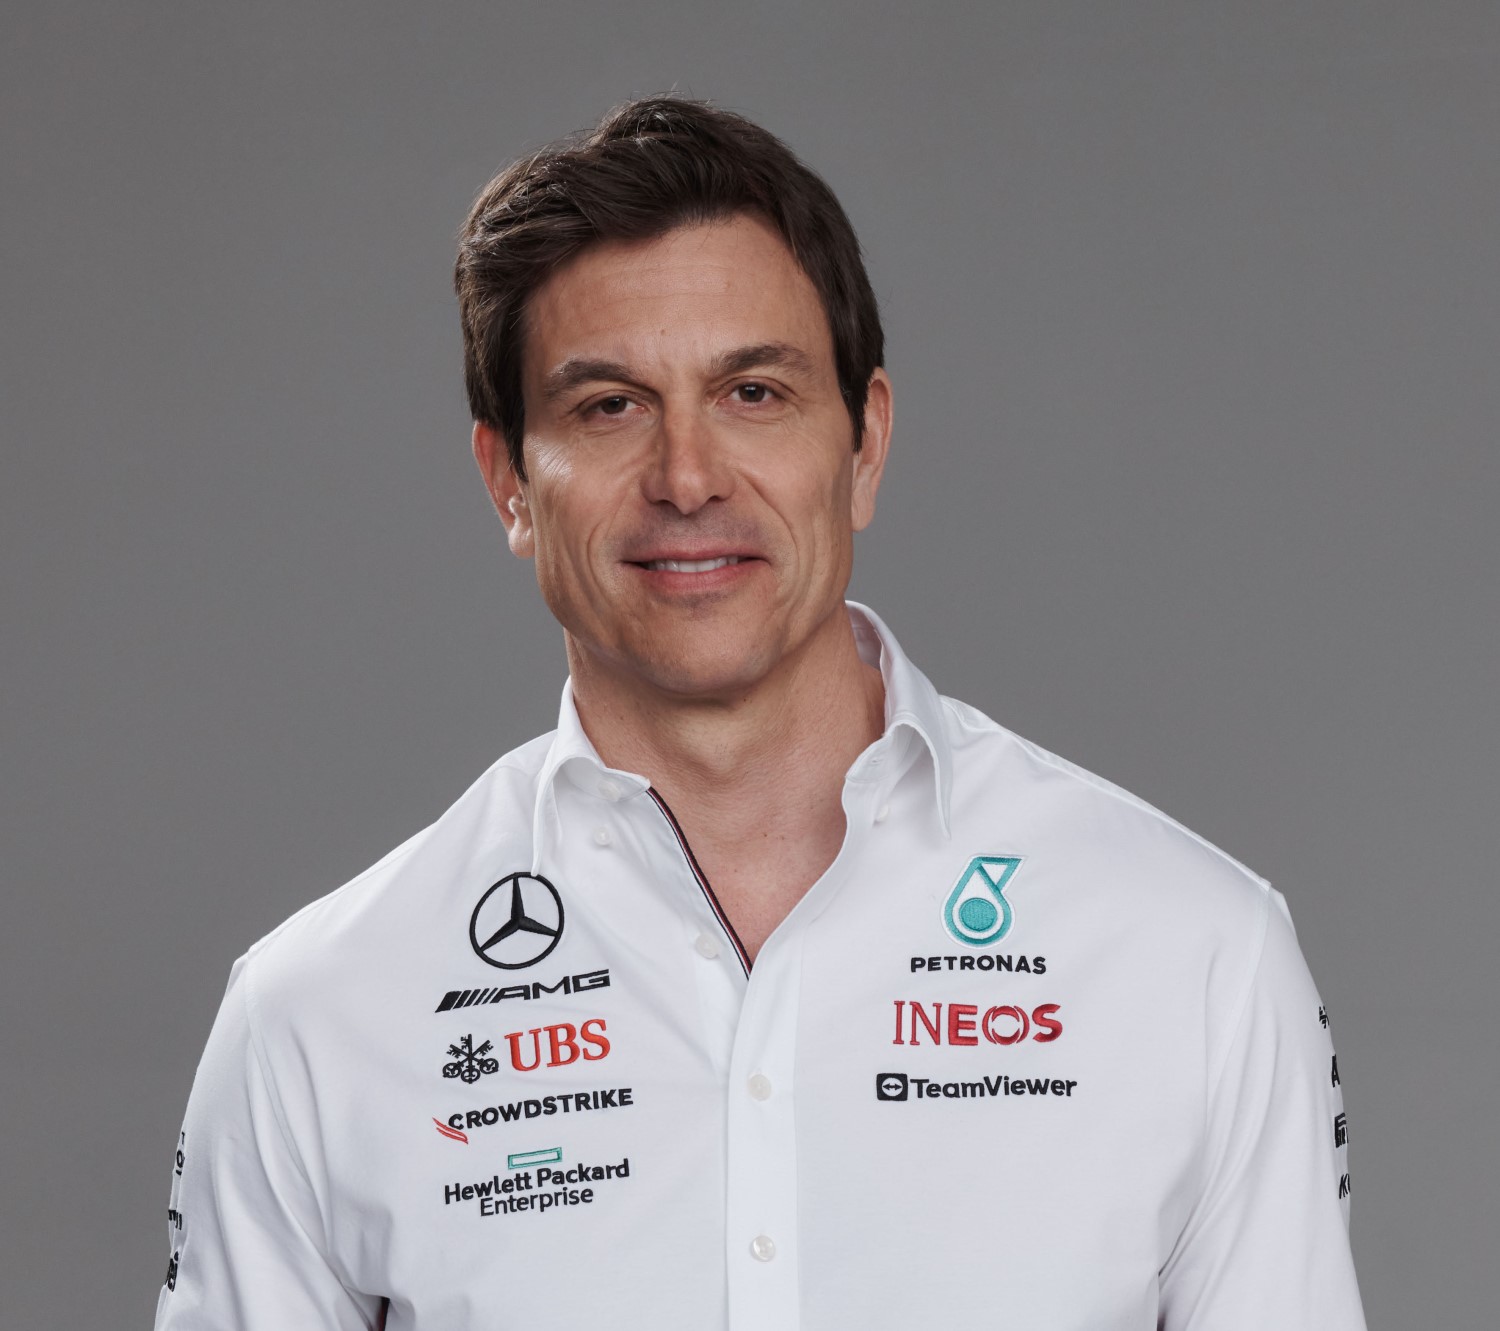 Video: How F1 helped make Toto Wolff a Billionaire